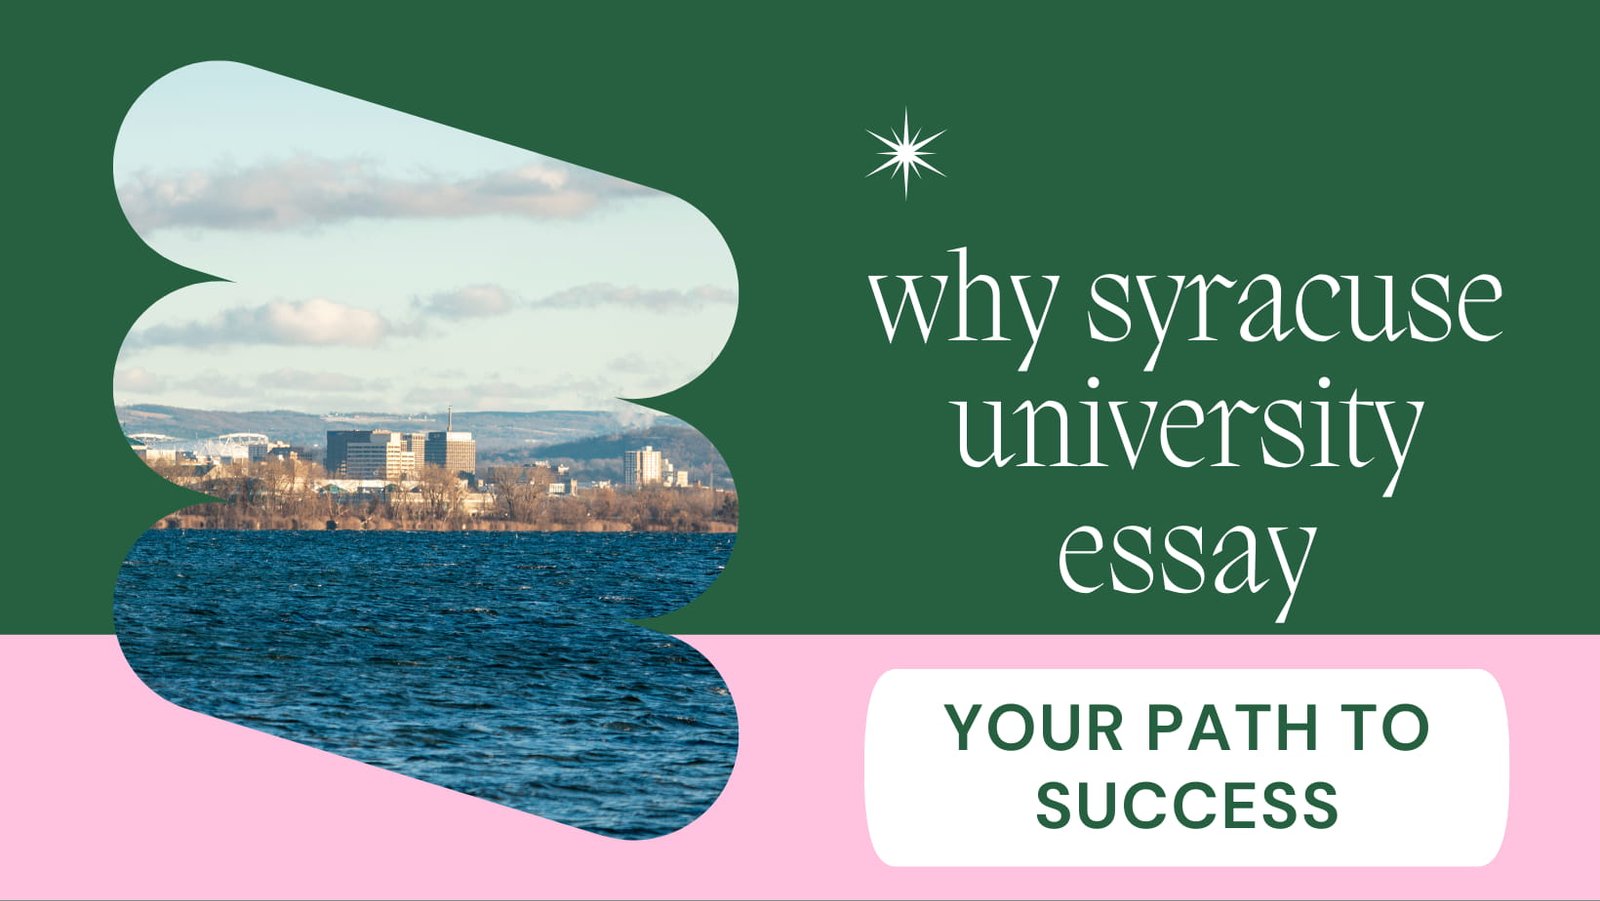 Why Choose Syracuse University Essay – Your Path to Success